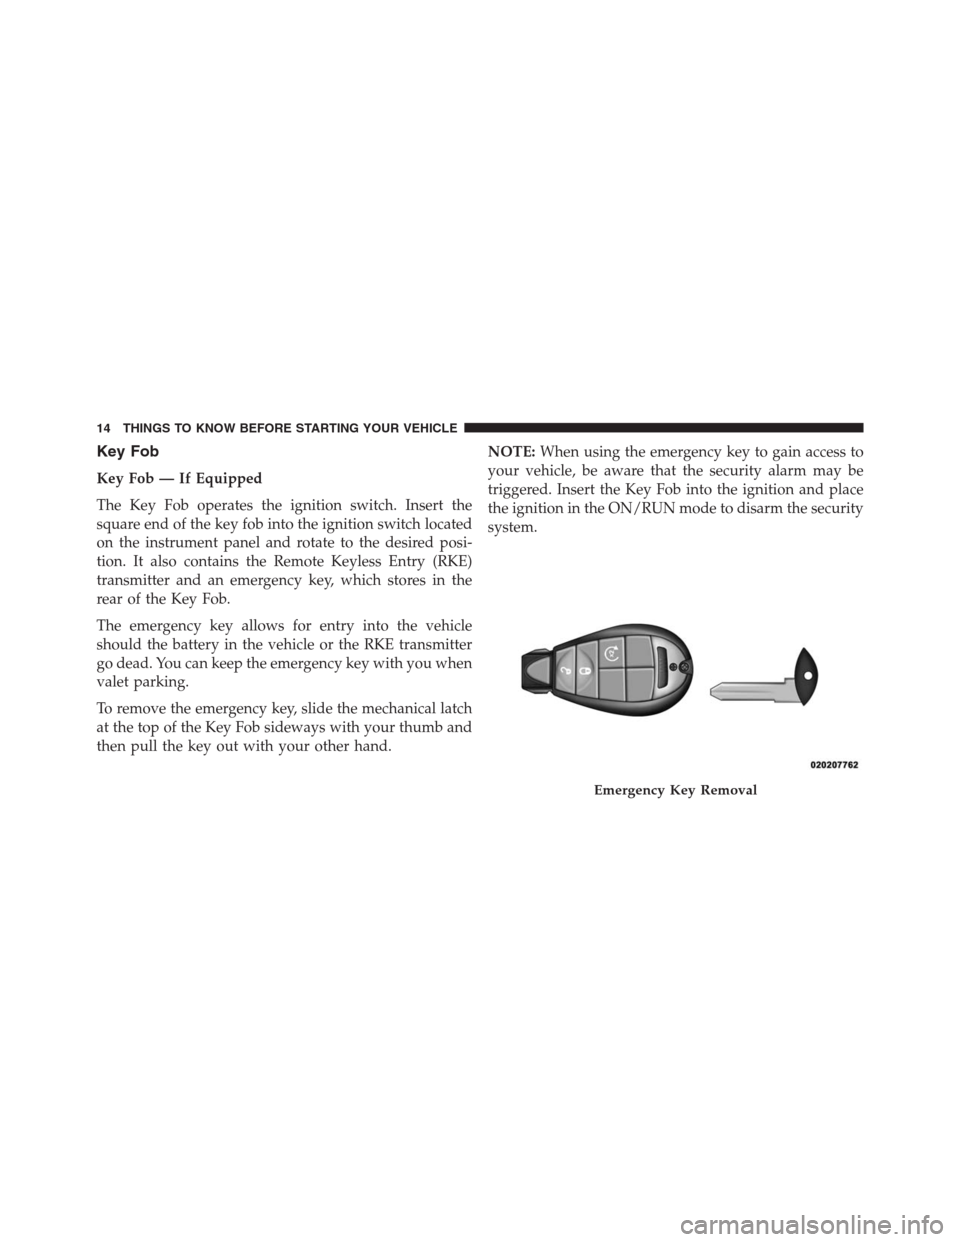 Ram 1500 2016  Owners Manual Key Fob
Key Fob — If Equipped
The Key Fob operates the ignition switch. Insert the
square end of the key fob into the ignition switch located
on the instrument panel and rotate to the desired posi-
